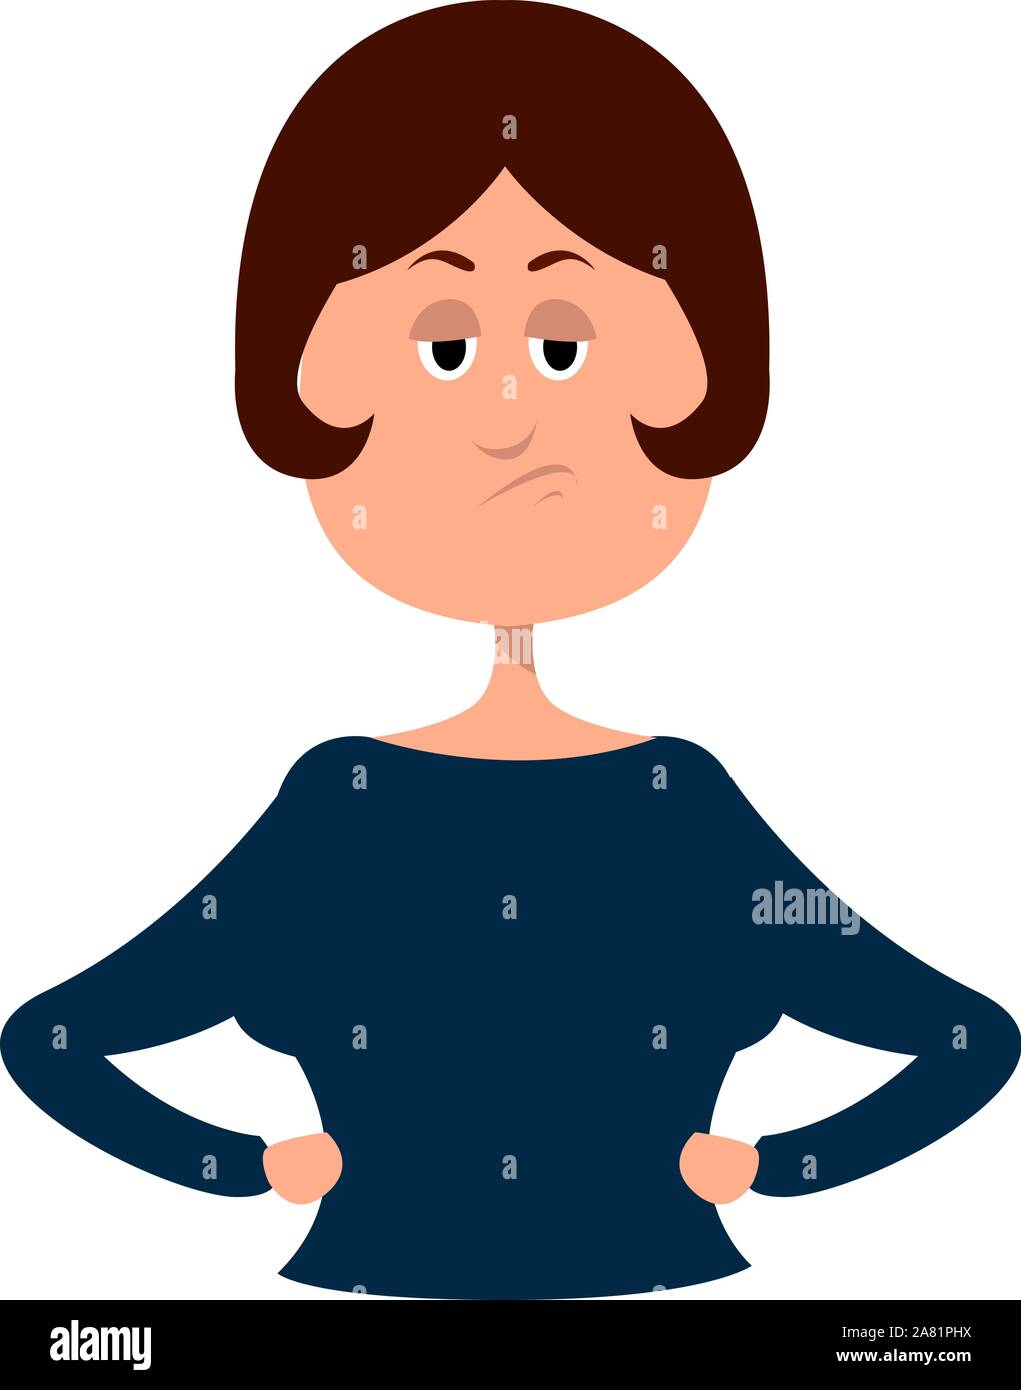 Angry woman, illustration, vector on white background. Stock Vector